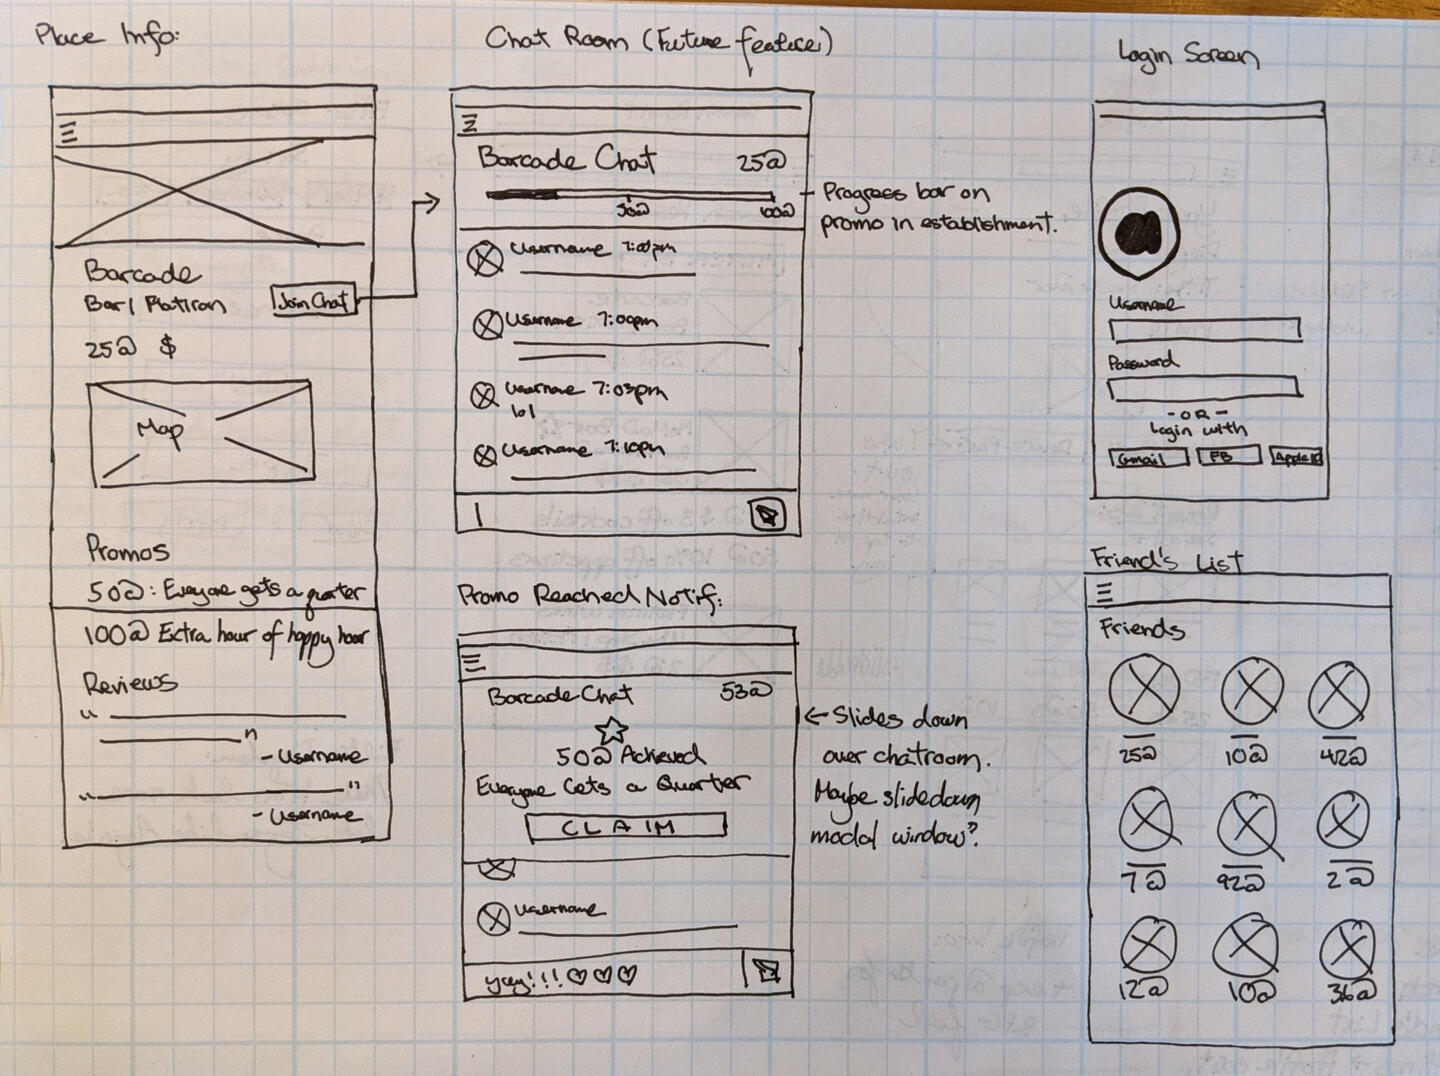 Low fidelity wireframe illustrations and notes on how @ would function and look.